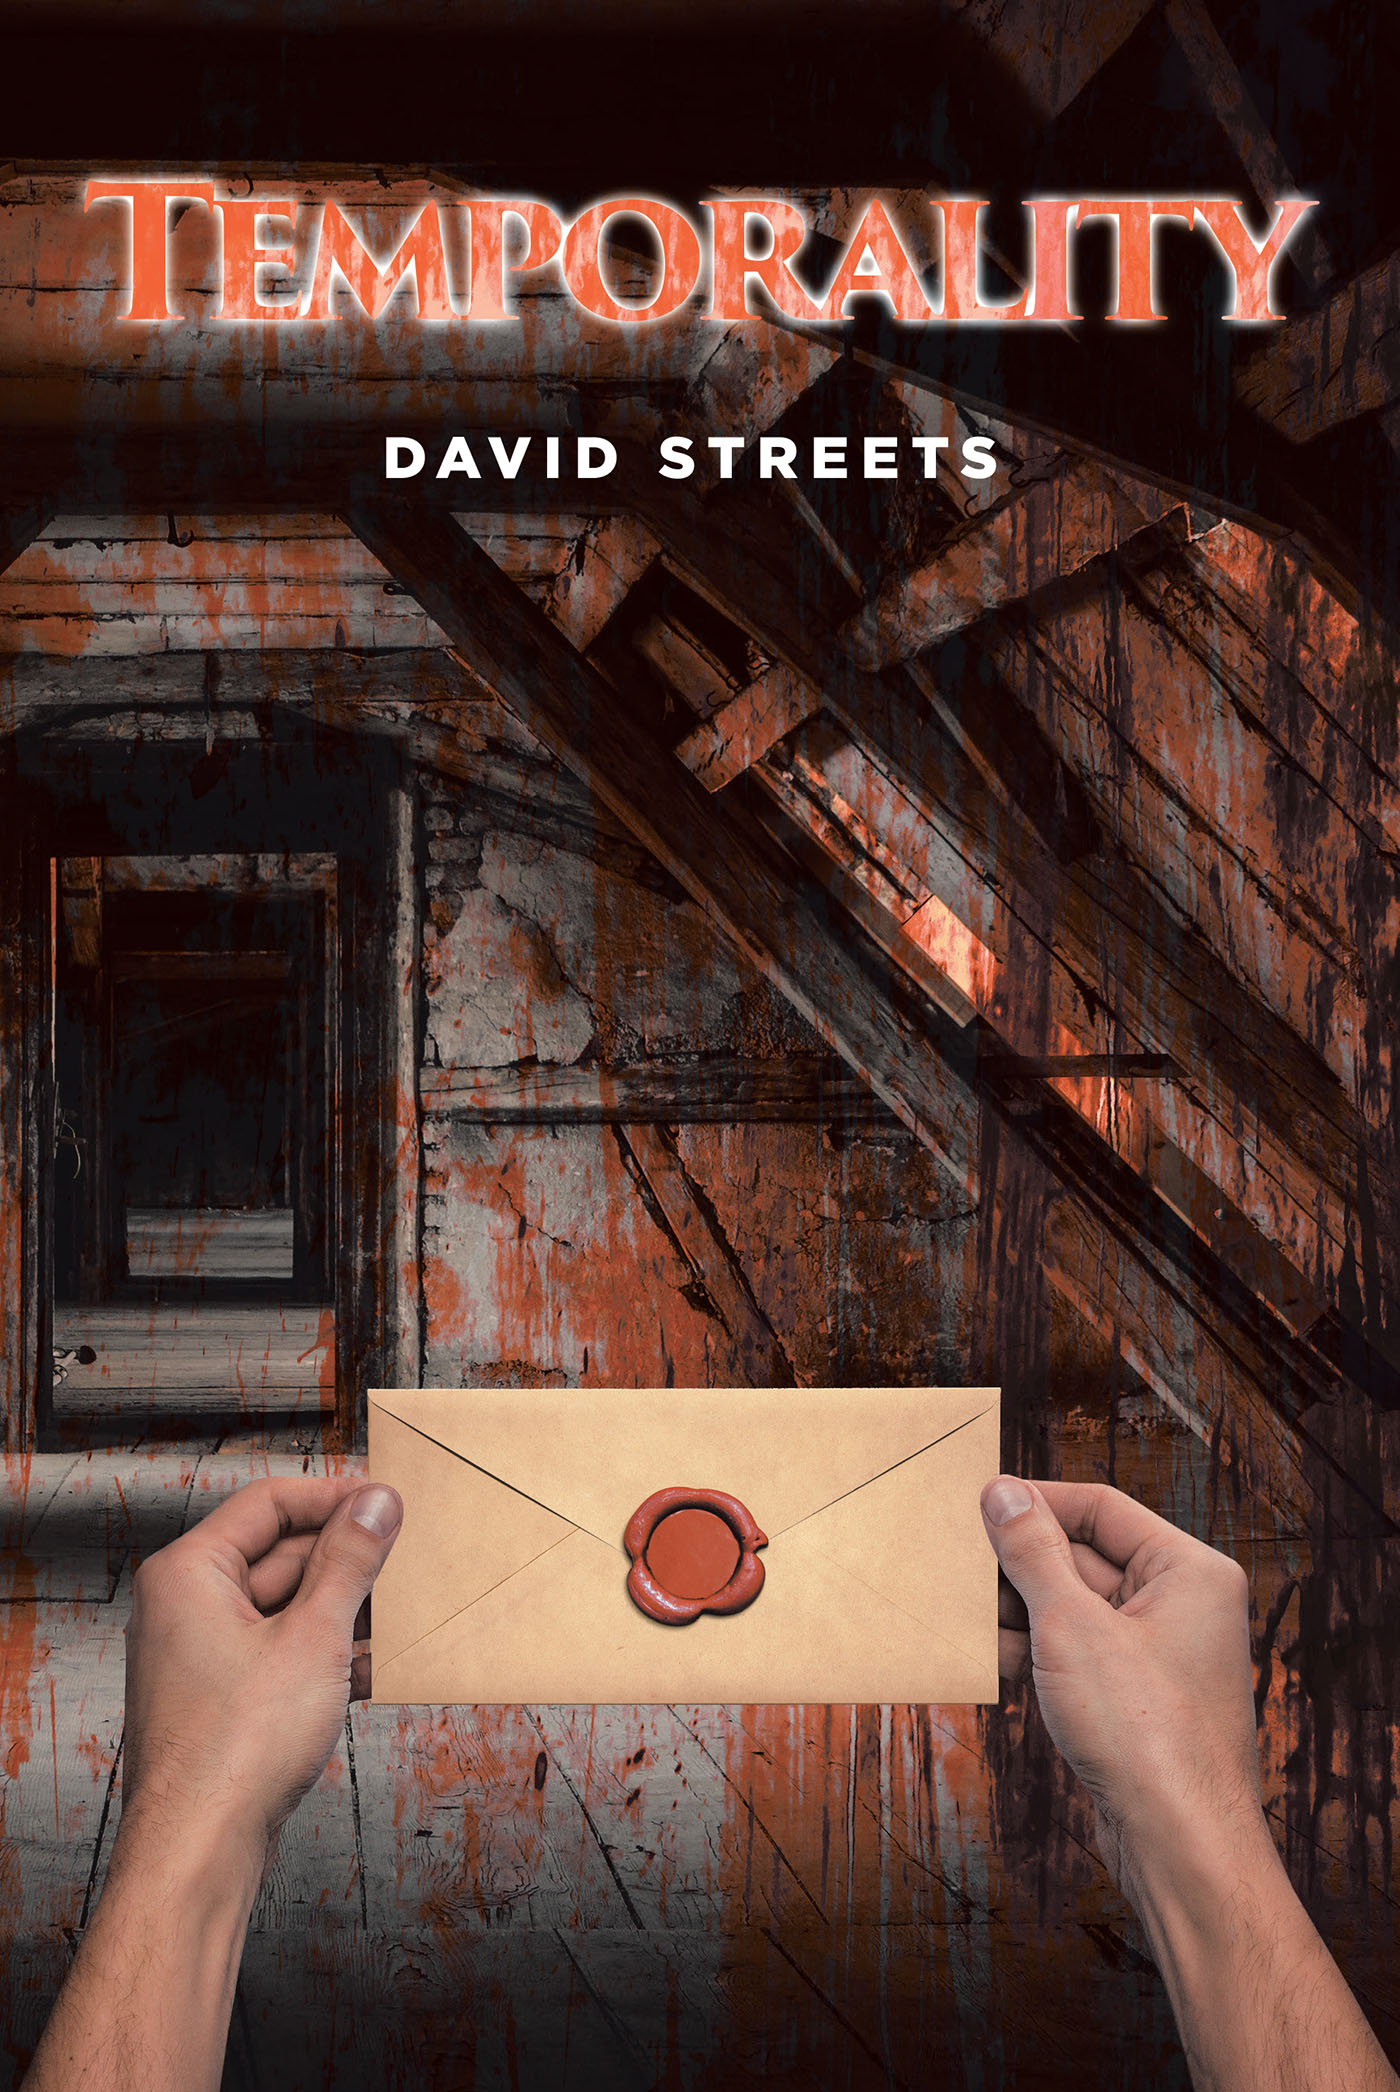 David Streets’s New Book, "Temporality," is the Captivating Story of a Young Man Who Uncovers a Startling Secret Long Kept Hidden While Investigating His Family's History